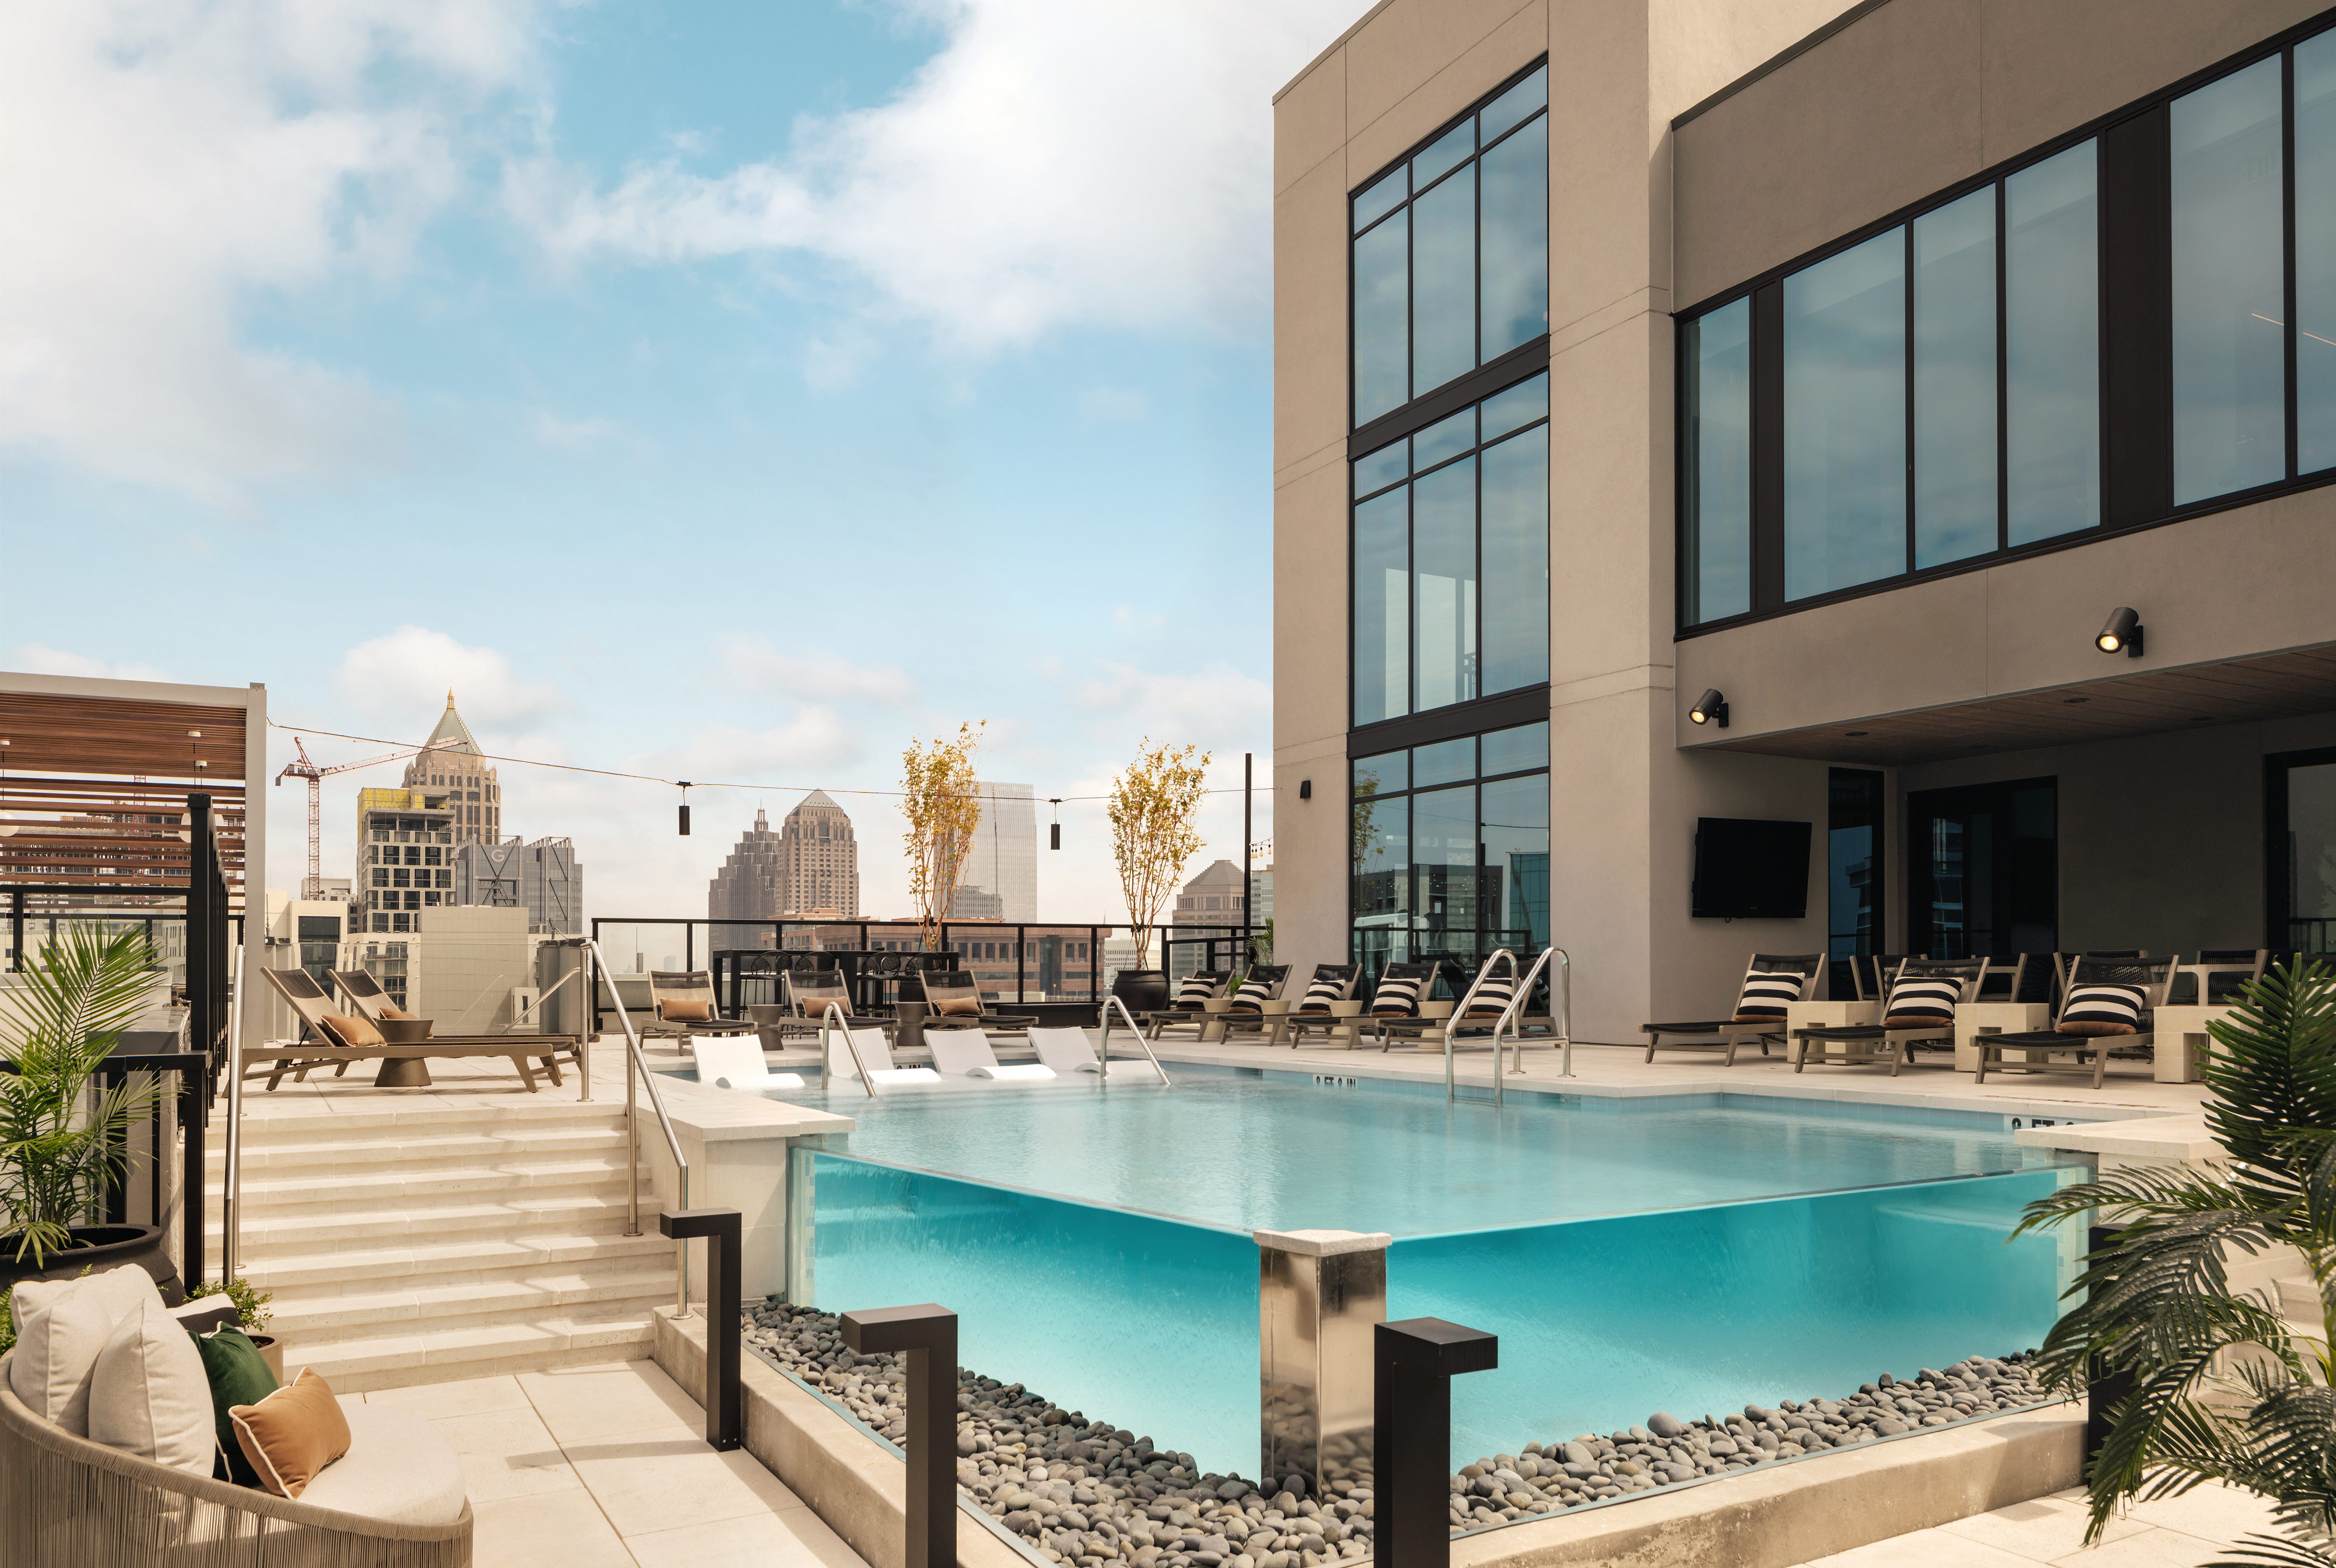 Exterior image of Whistler's pool deck overlooking the midtown skyline.